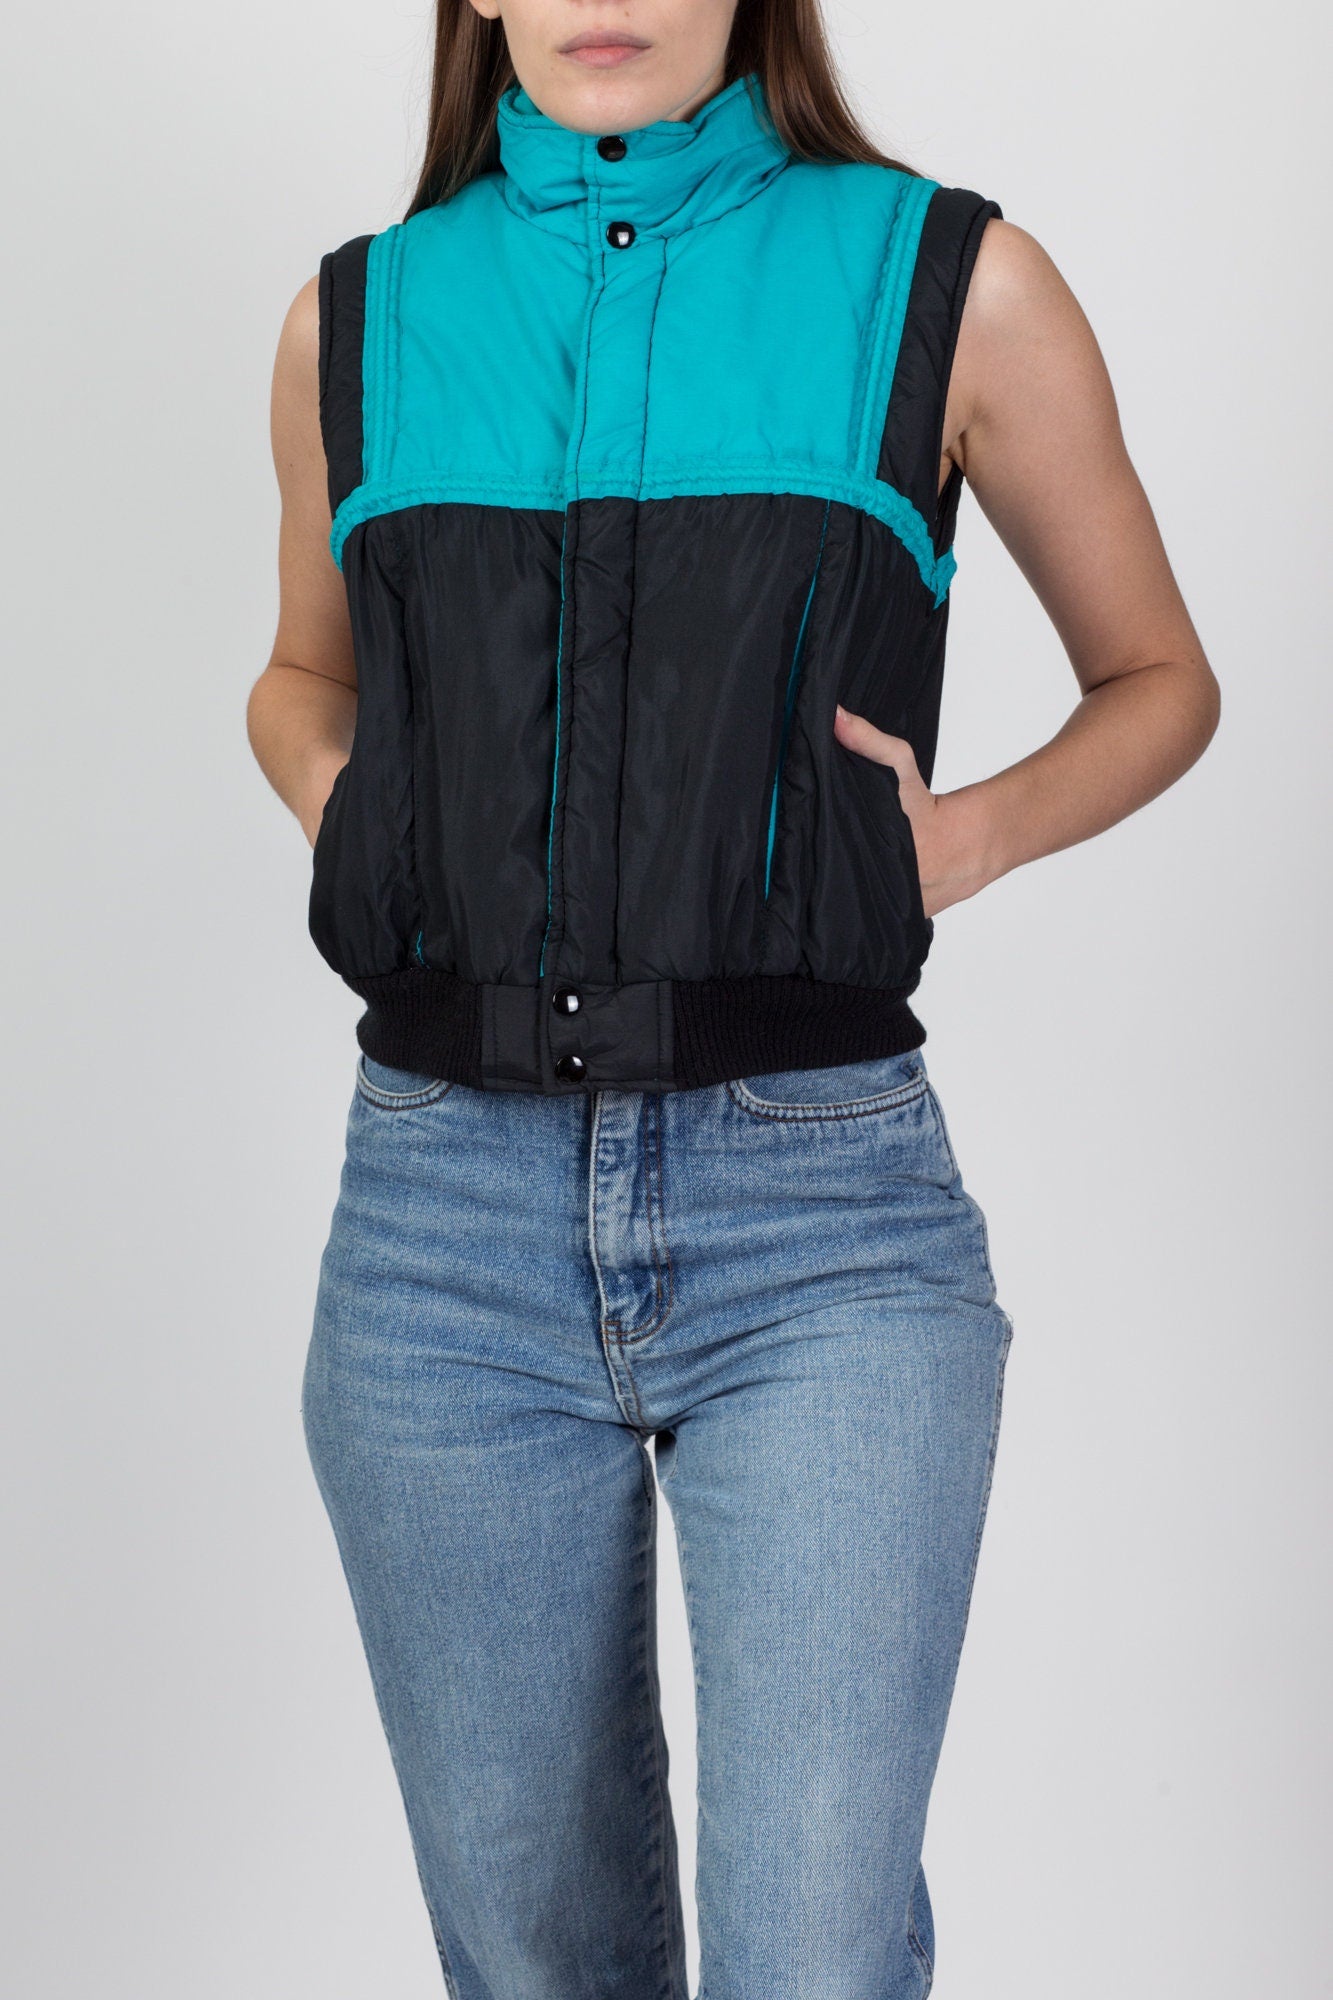 80s 90s Color Block Puffer Vest - Small – Flying Apple Vintage